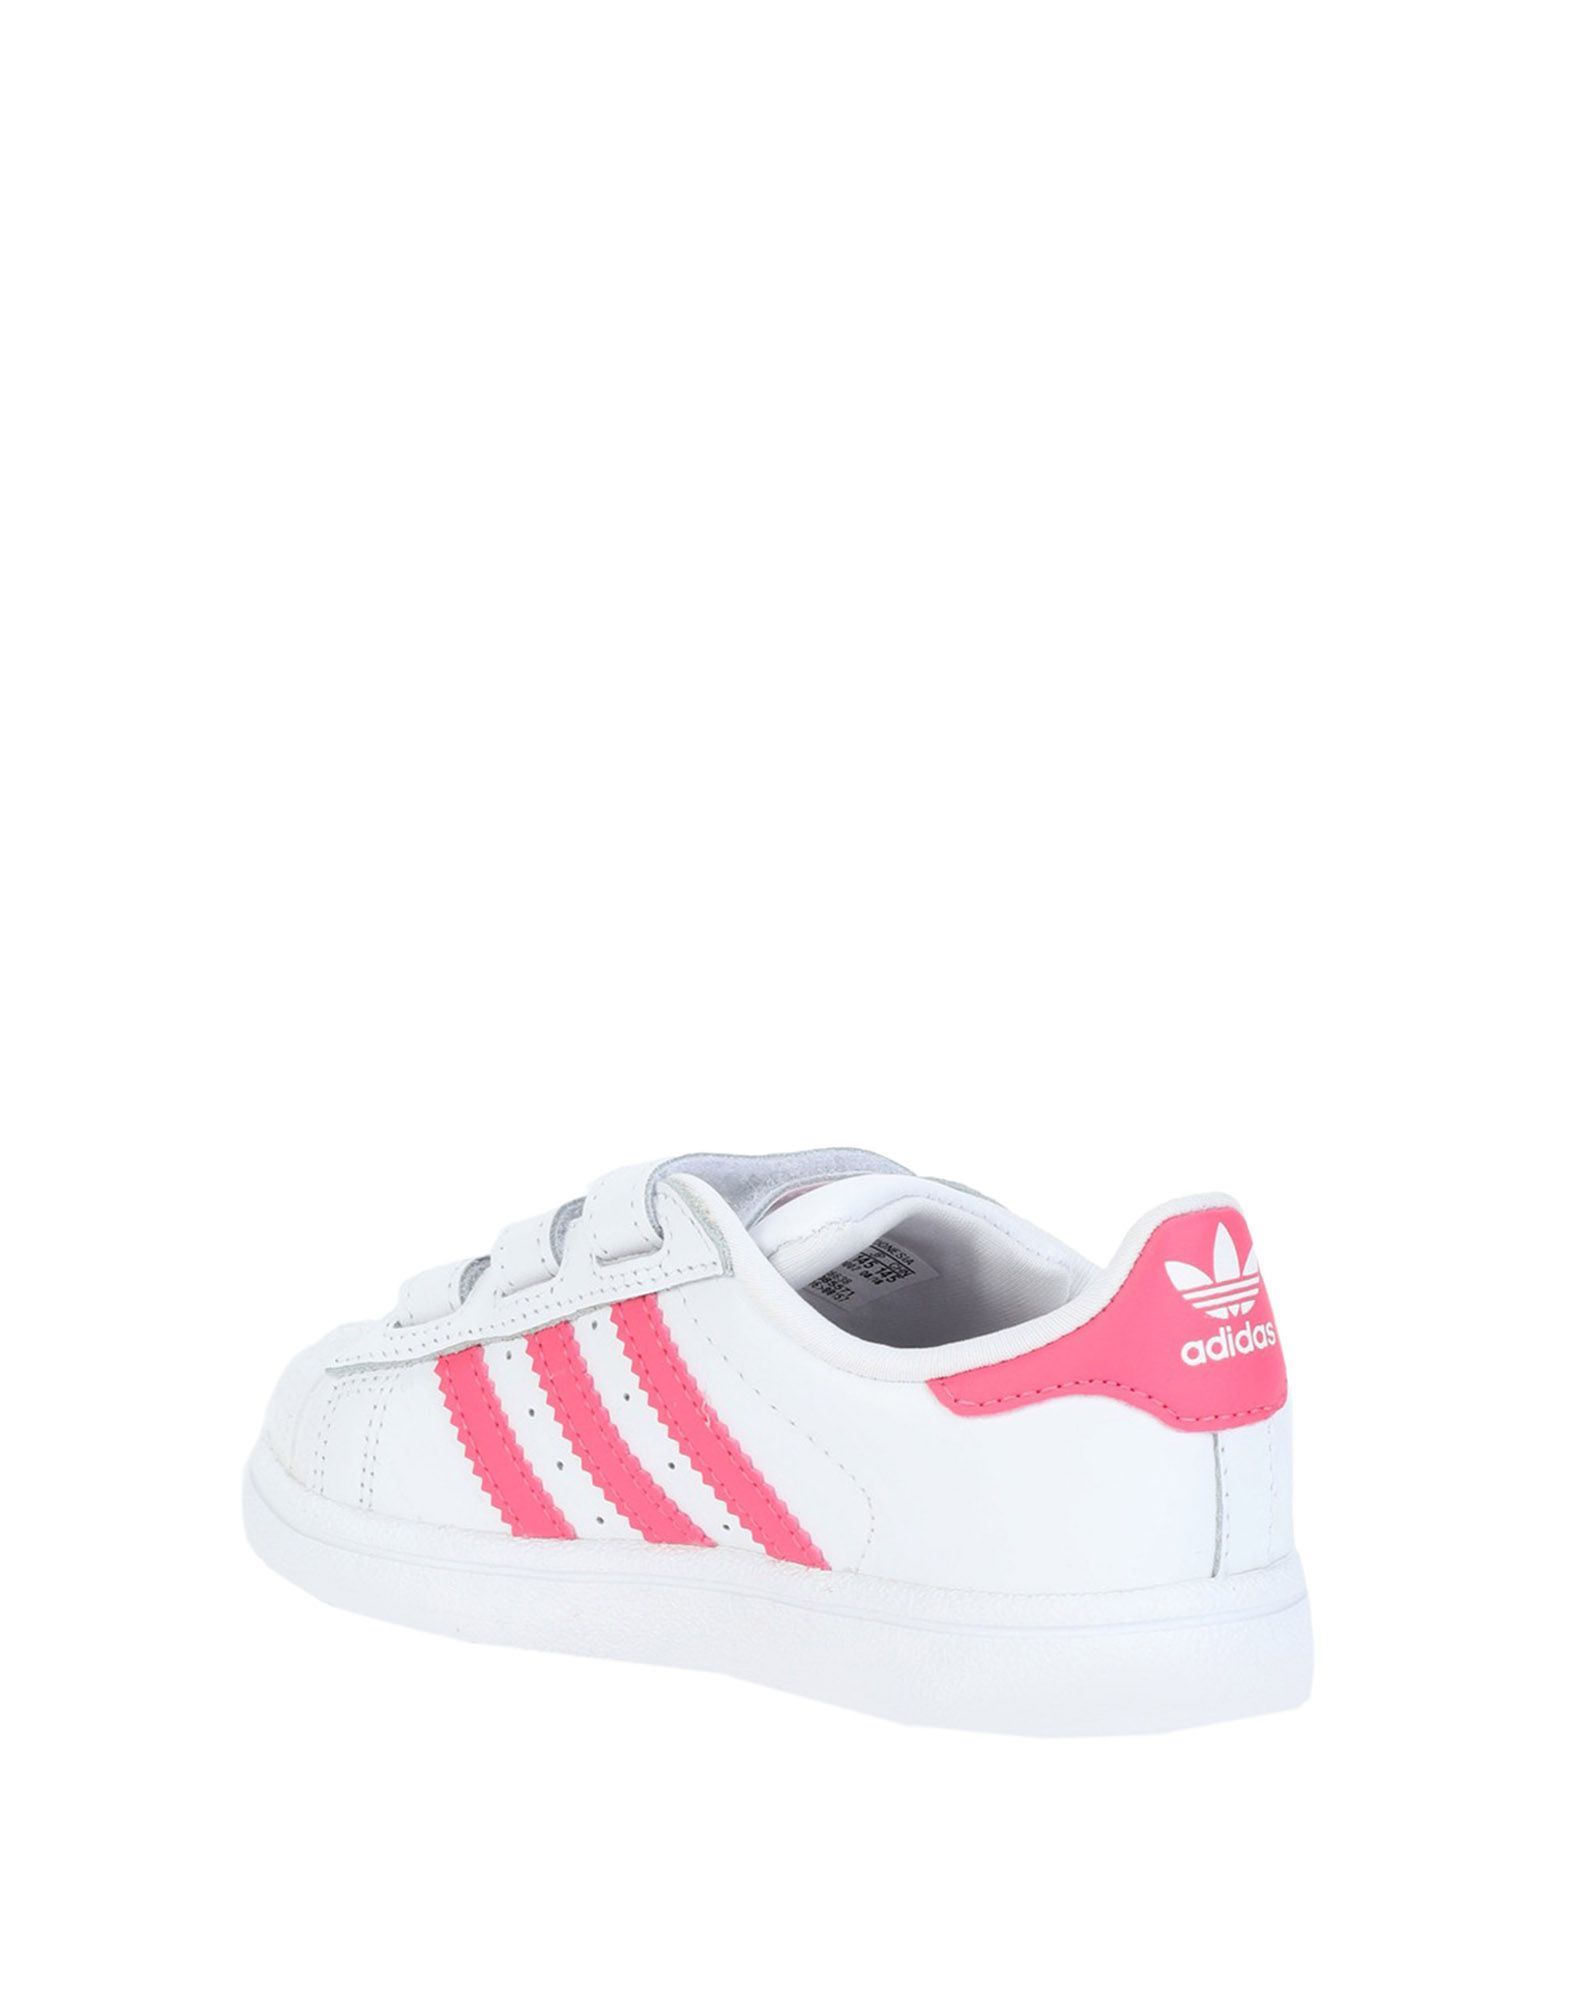 adidas Originals Girls' Trainers Leather in White